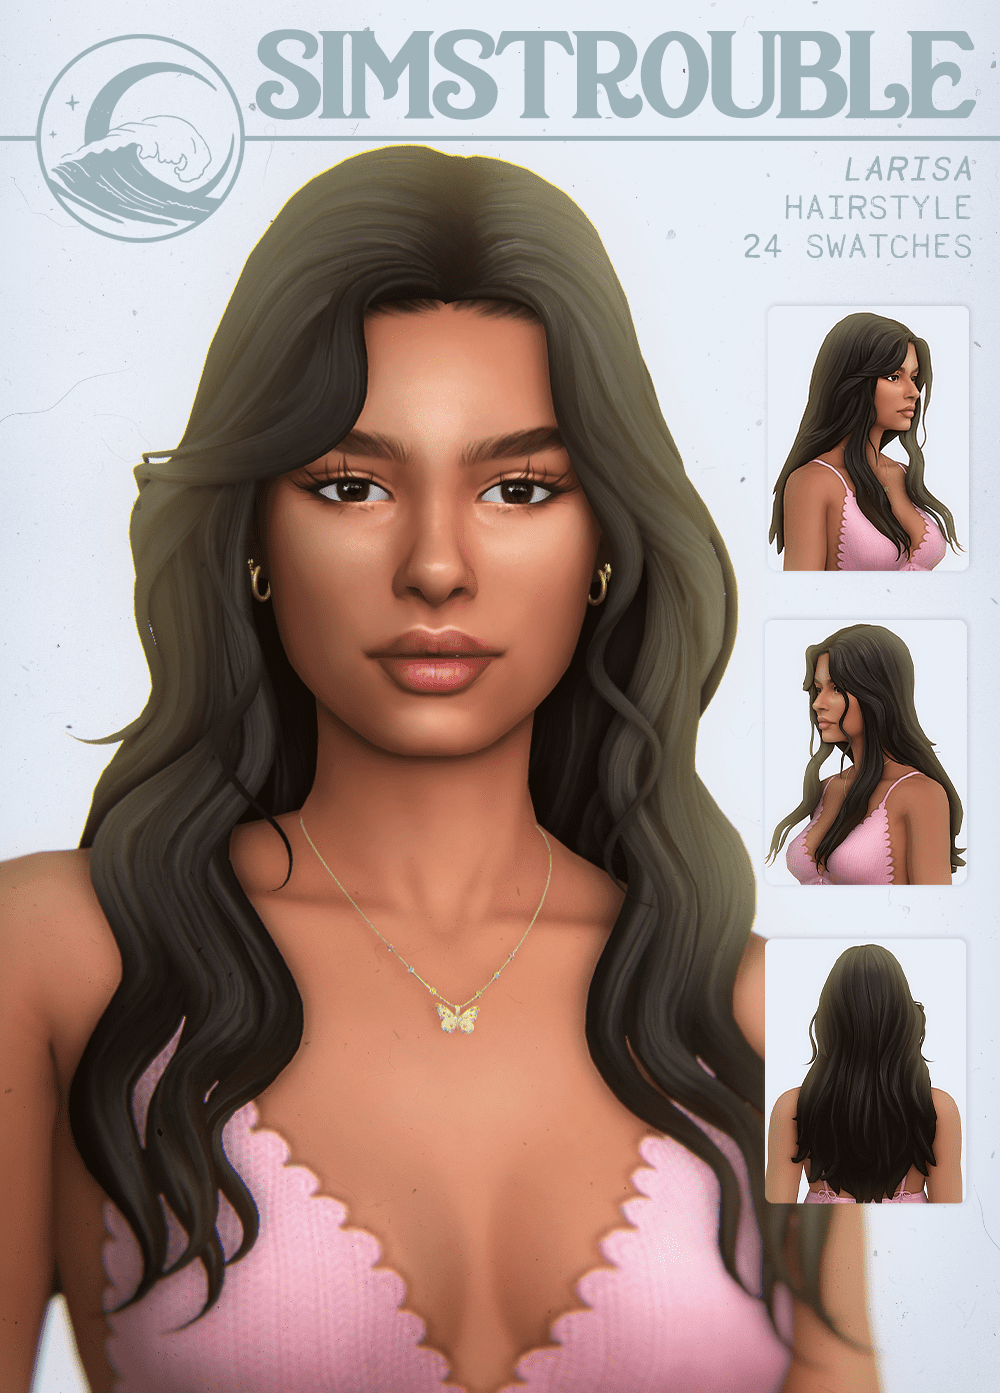 Larisa Hairstyle by simstrouble HD Wallpaper